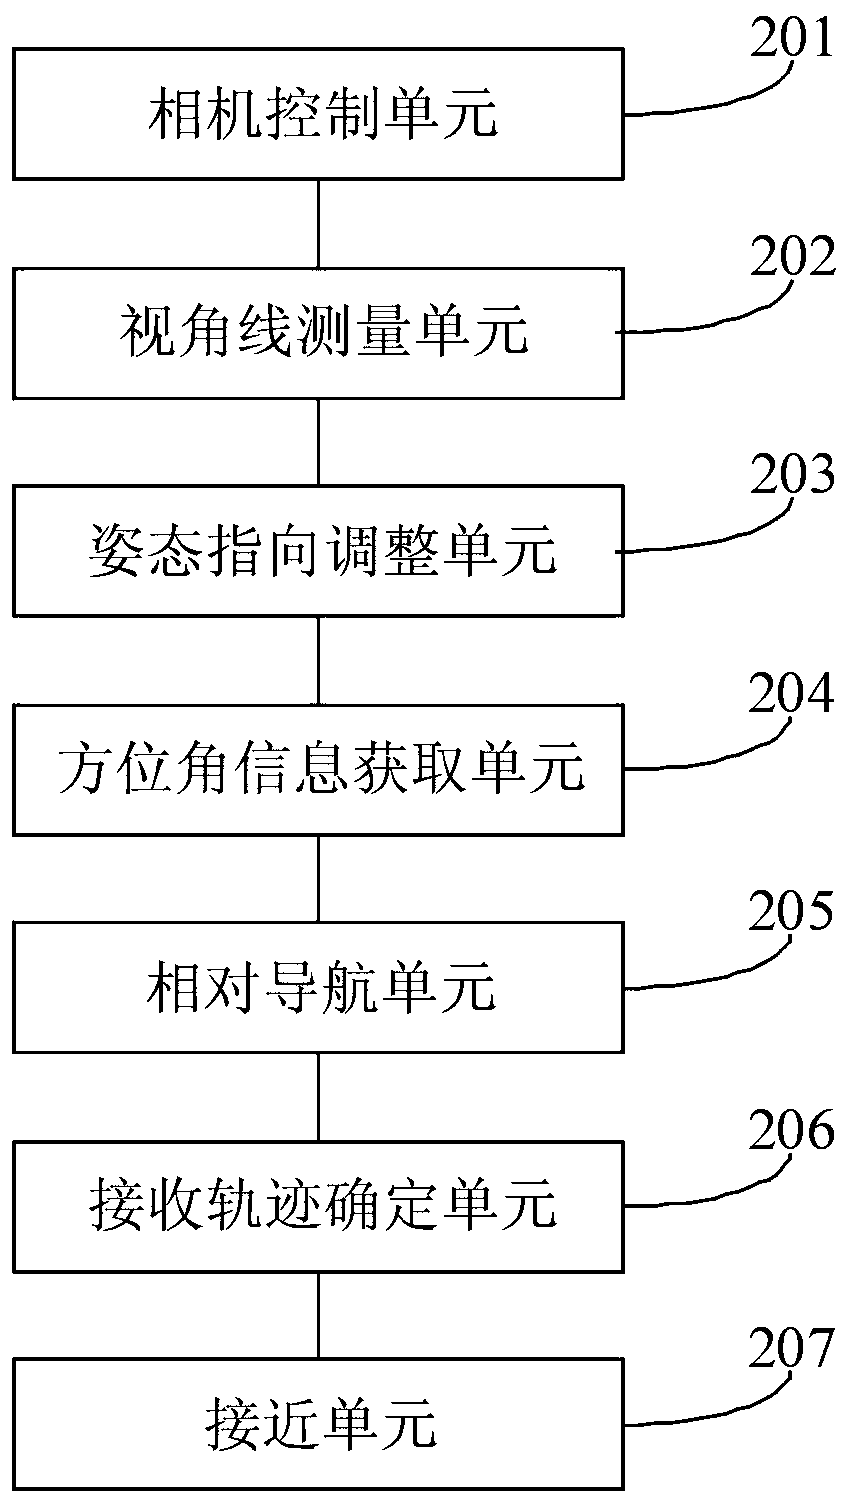 Method and device for rendezvous and docking of space non-cooperative targets